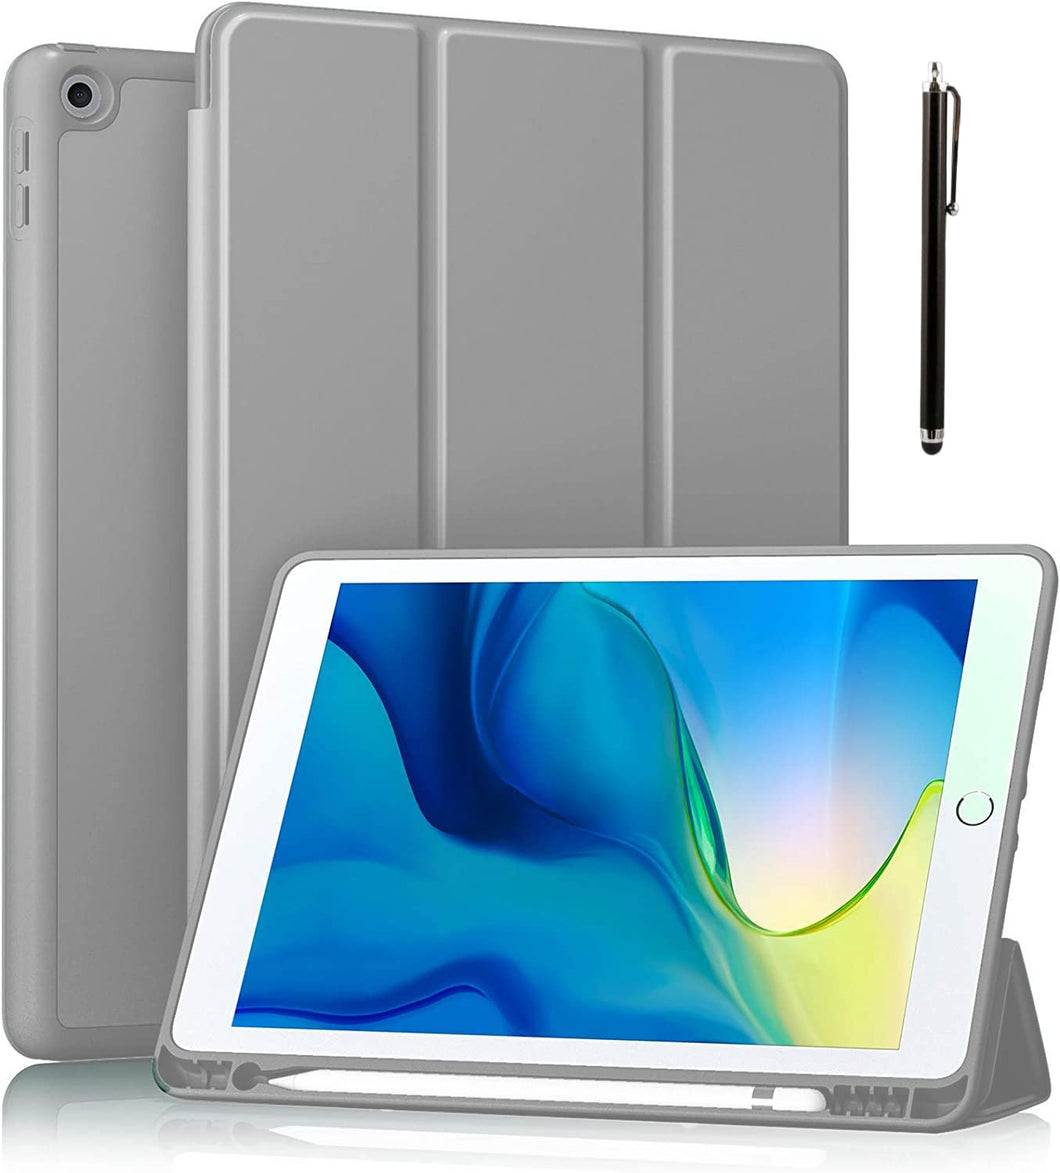 ProElite Smart Case for iPad 10.2 inch 2021 9th/8th/7th Gen [Auto Sleep/Wake Cover] [Pencil Holder] [Soft Flexible Case] Recoil Series - Grey with Stylus Pen